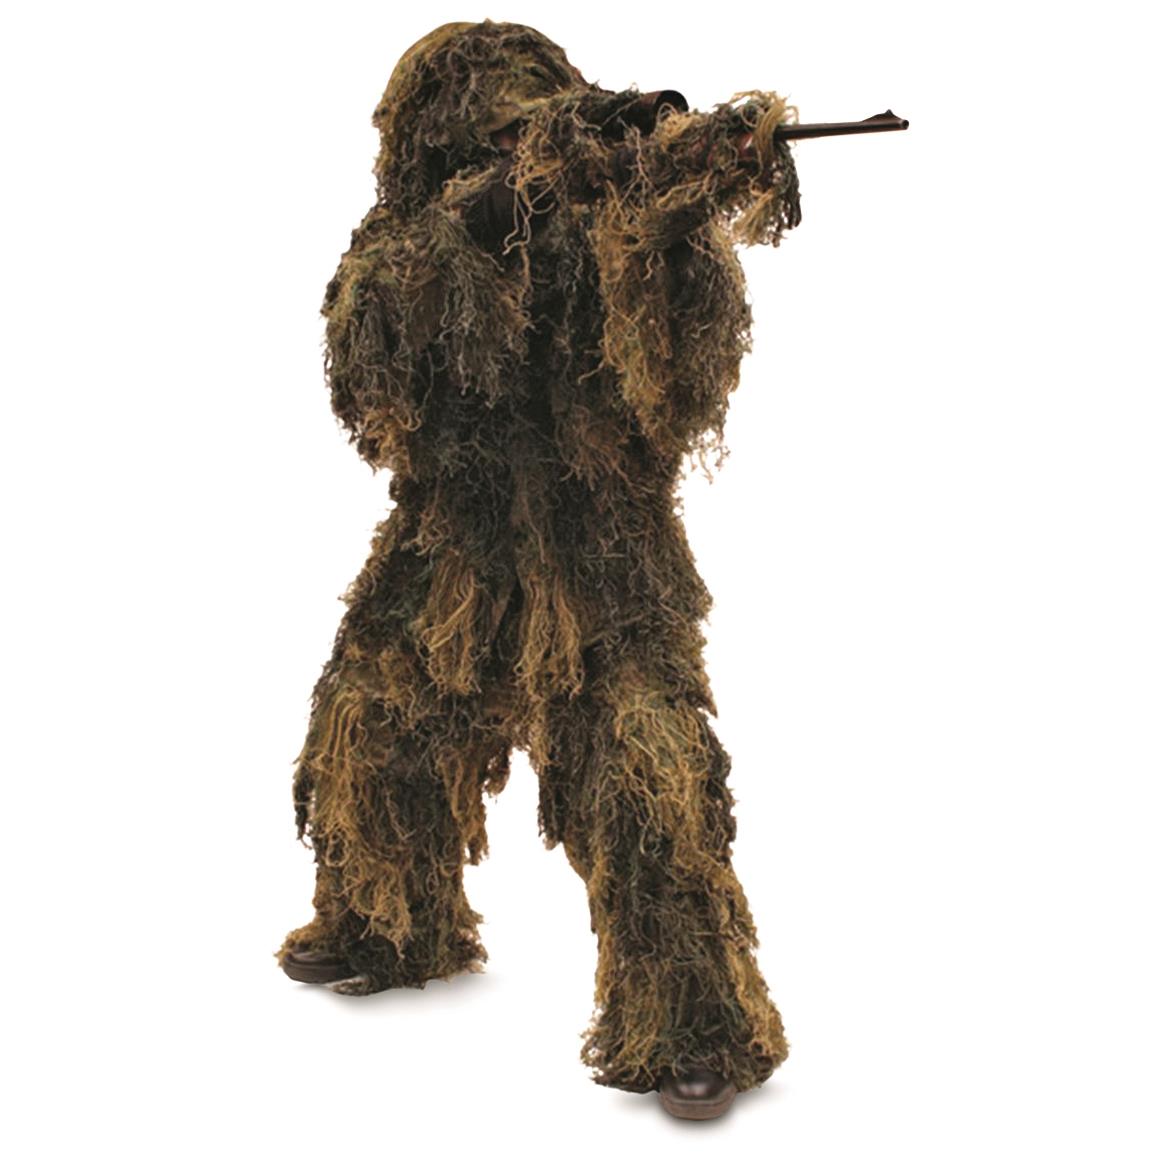 Red Rock Outdoor Gear™ Youth Ghillie Suit, 5 Piece, Woodland